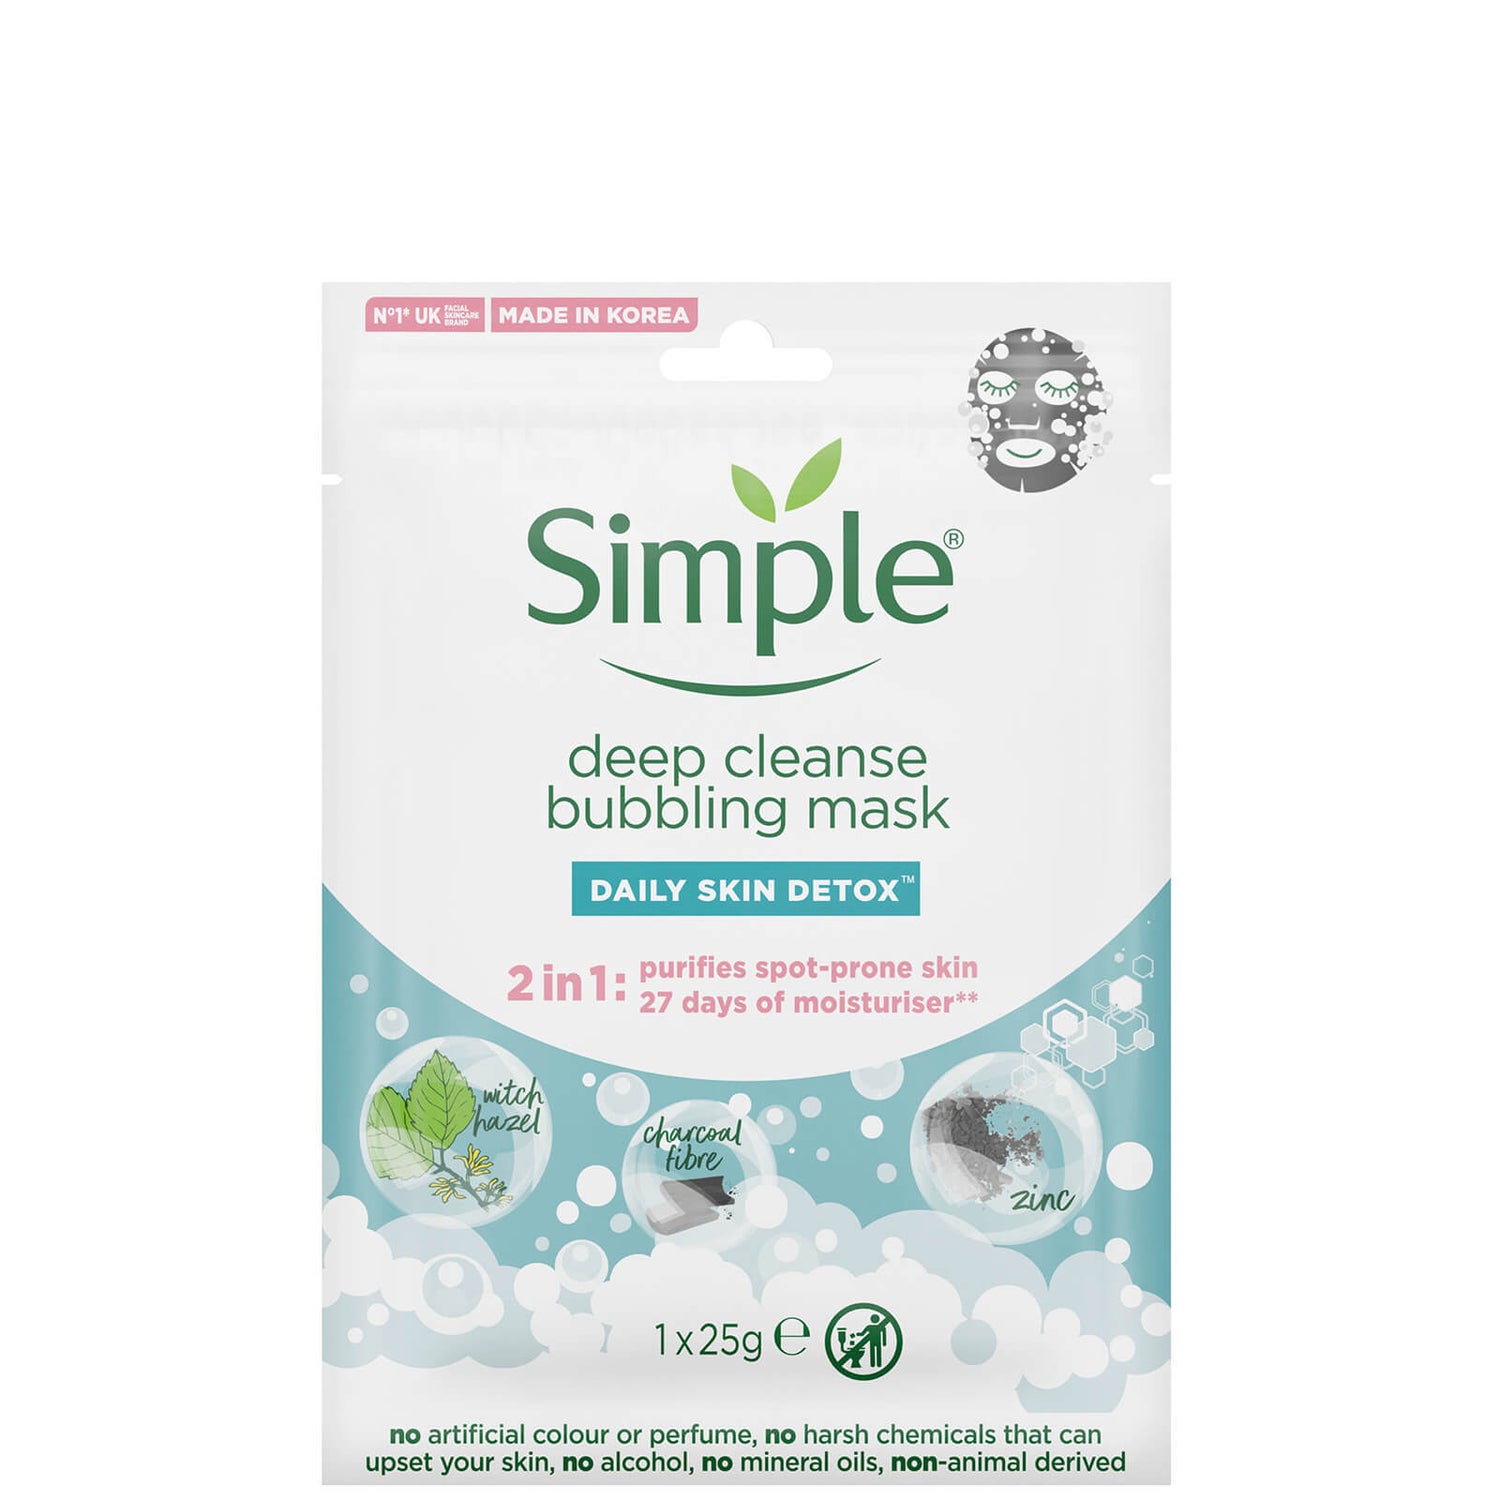 Simple Daily Skin Detox Deep Cleanse Bubbling Mask